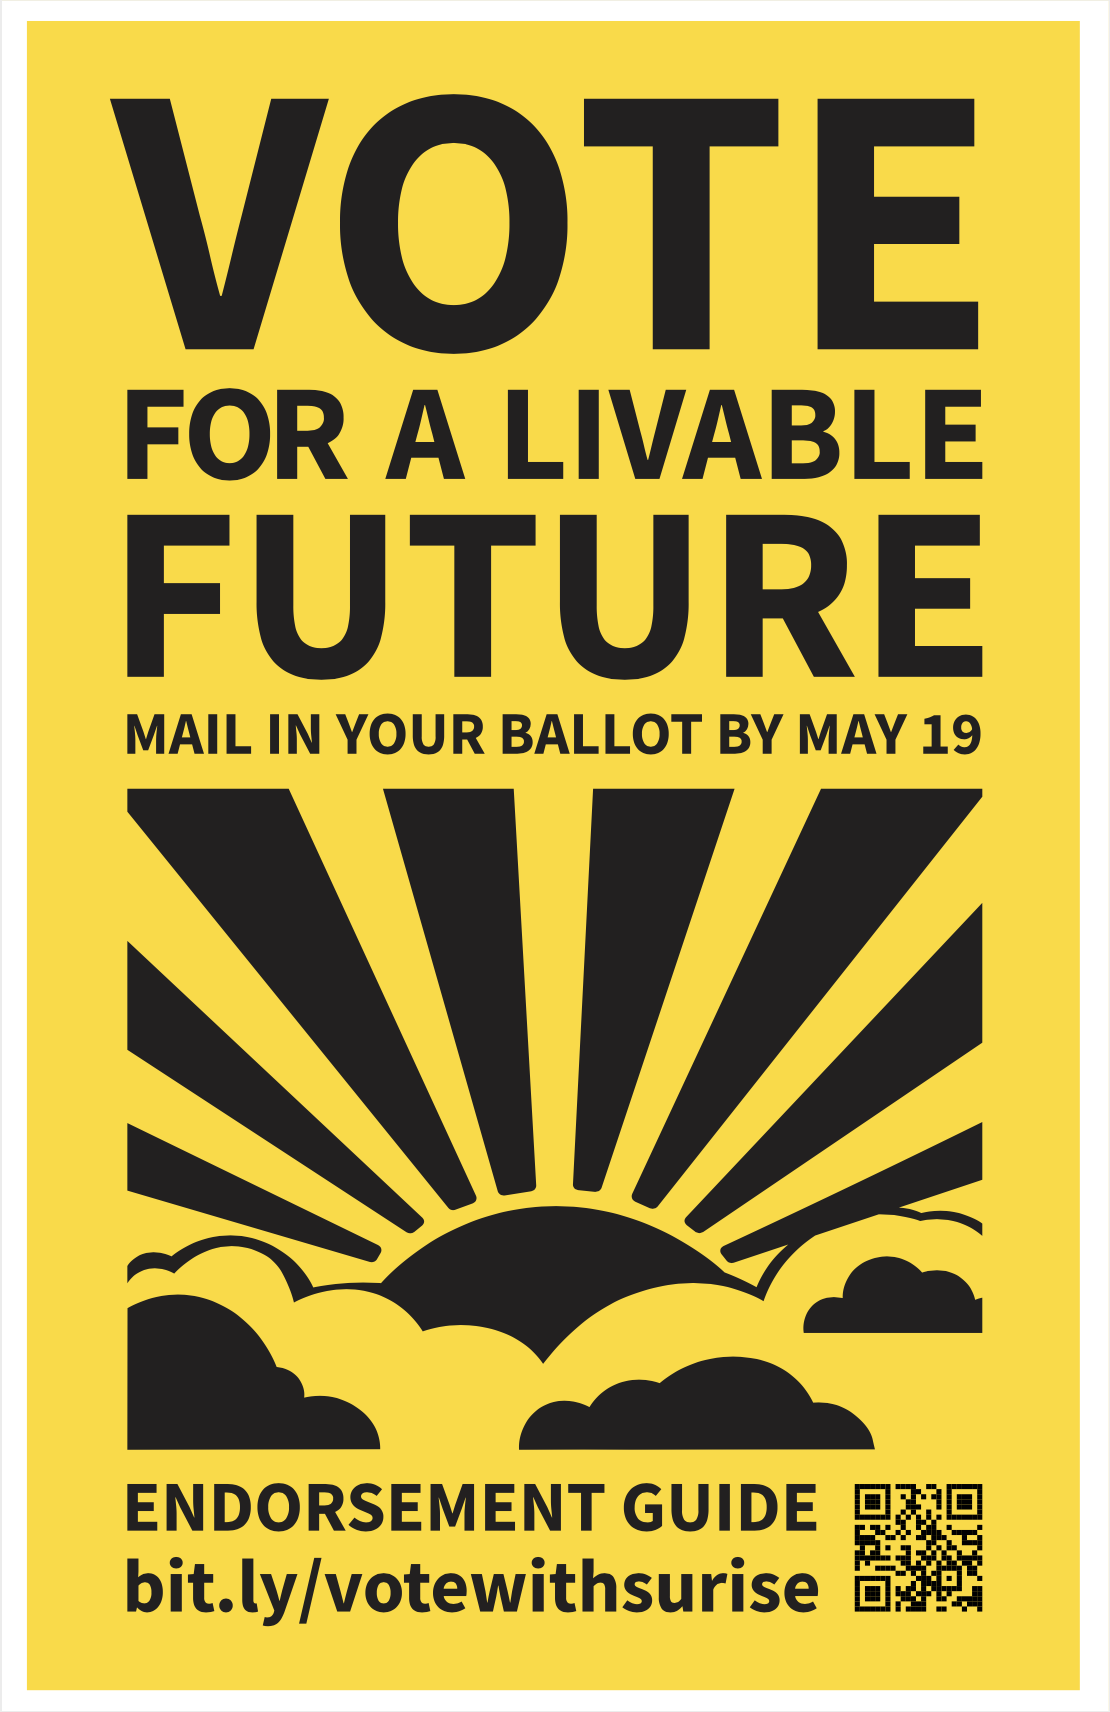 Vote for A Liveable Future (Co-designed with Sam Richins), 2020